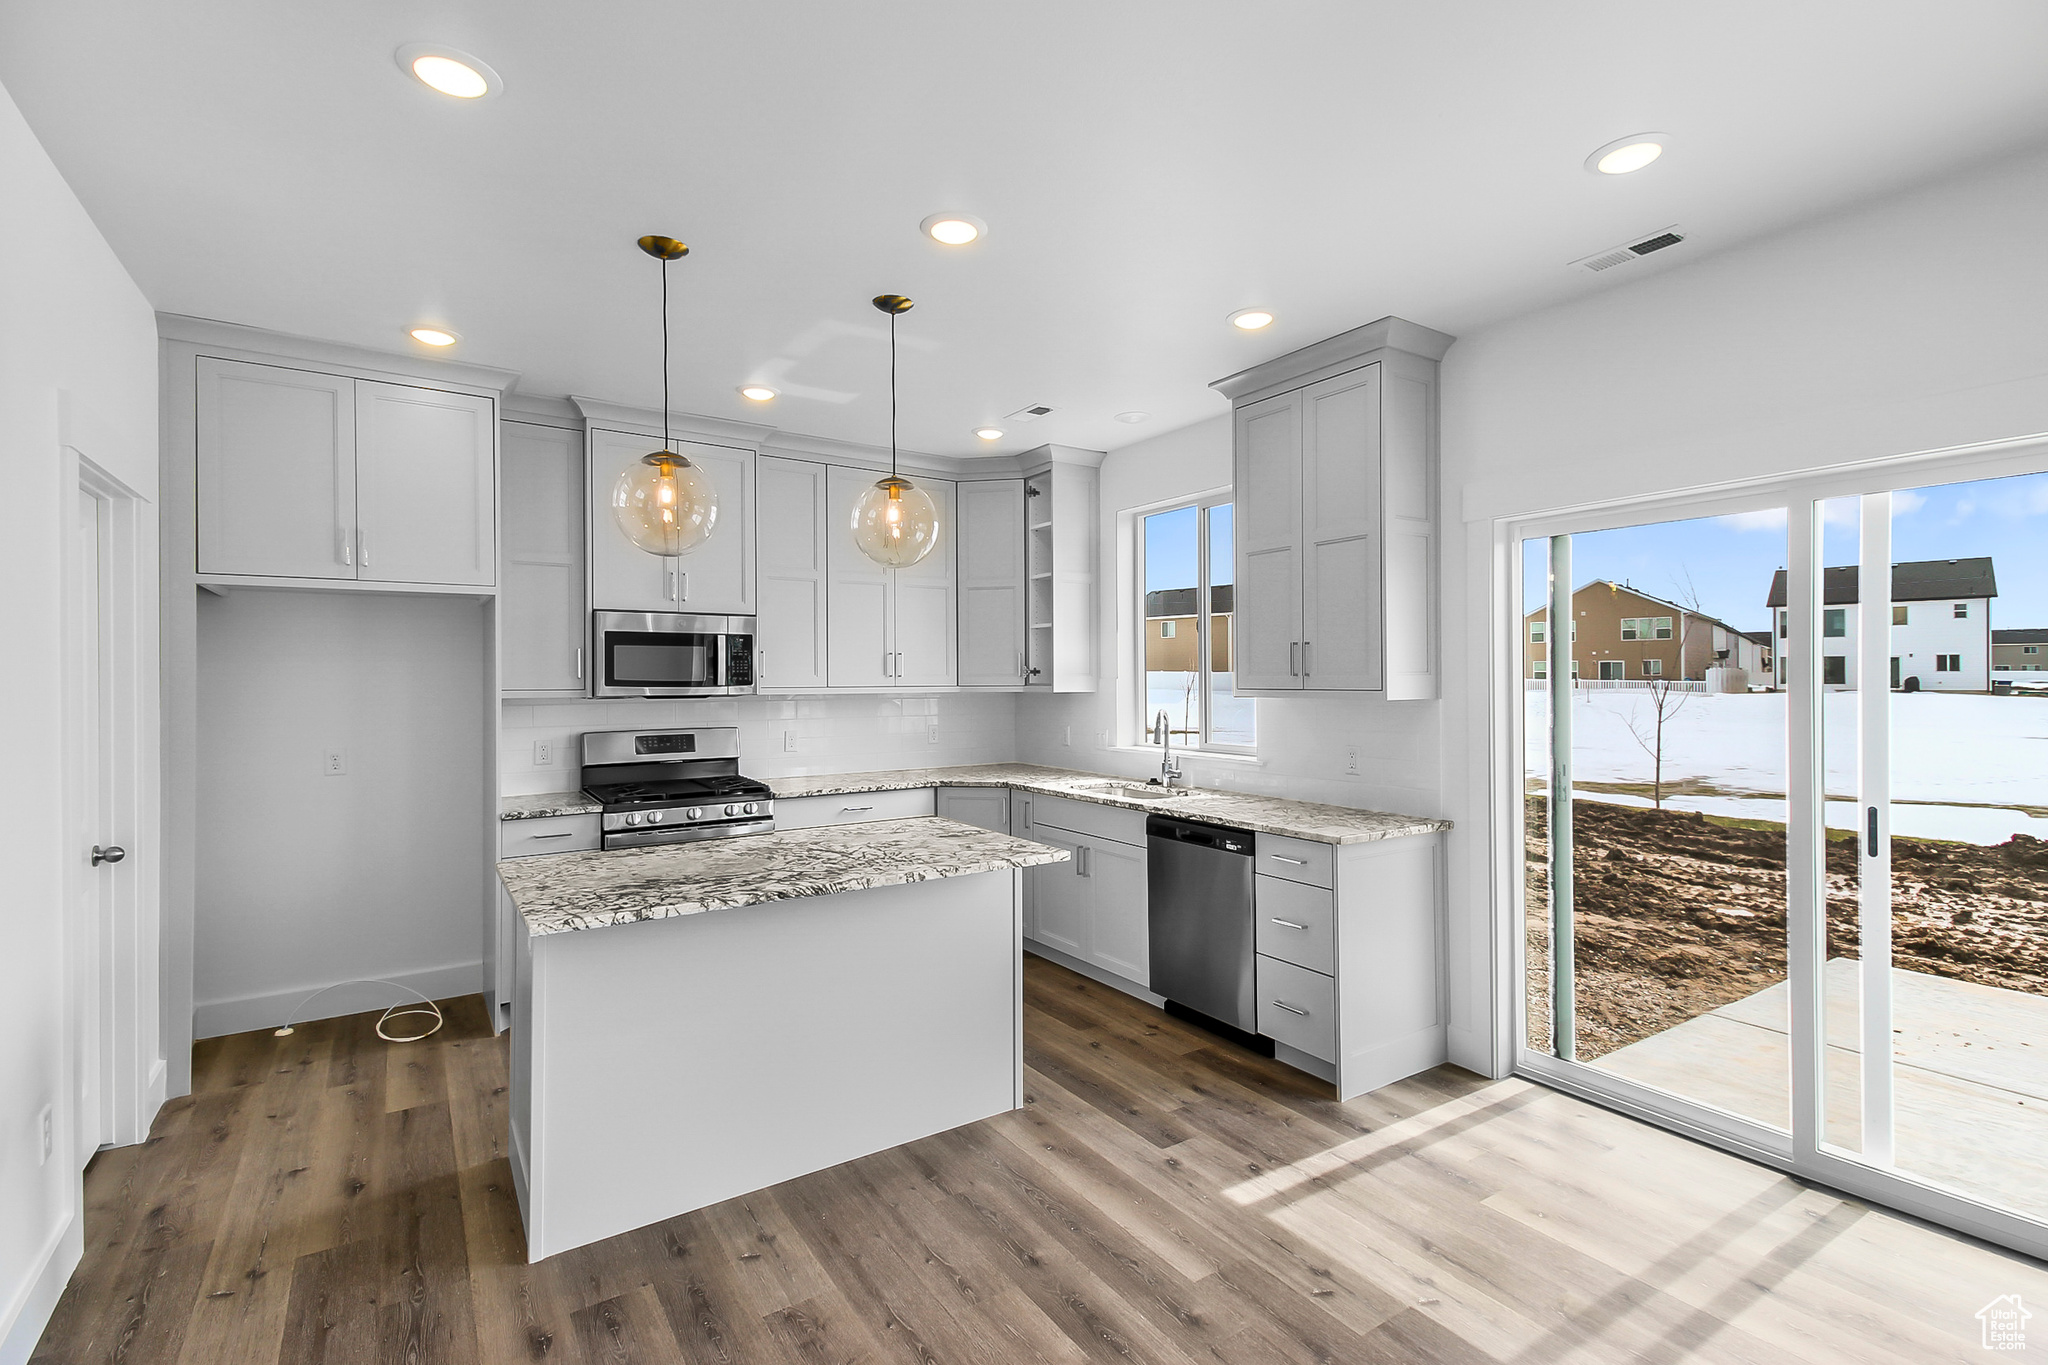 Kitchen featuring dark hardwood / wood-style floors, plenty of natural light, a kitchen island, and appliances with stainless steel finishes